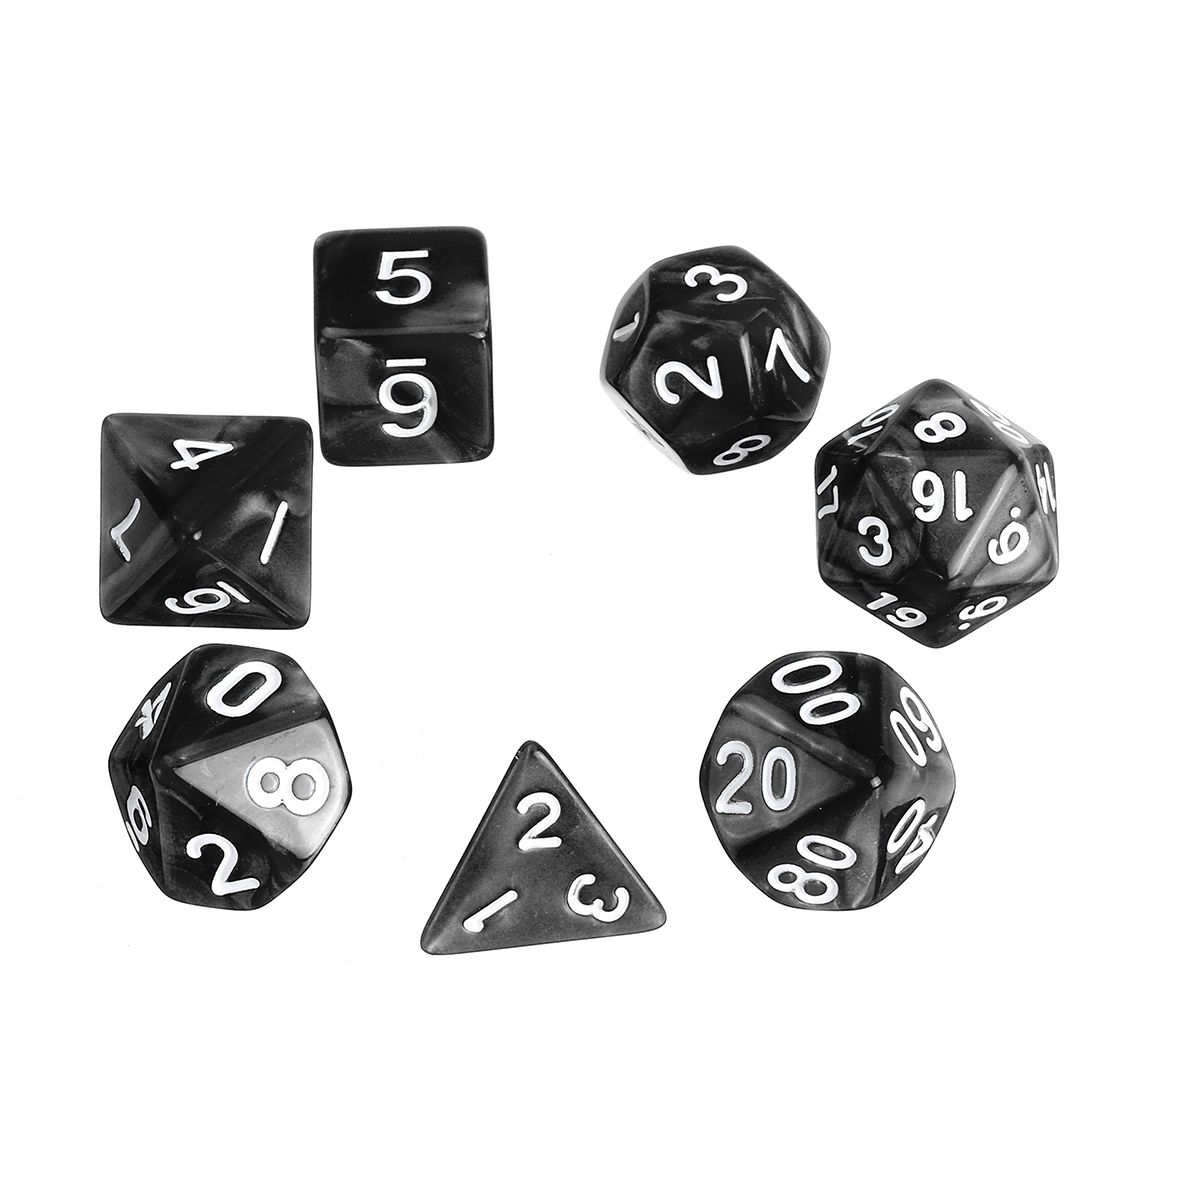 Multisided-Dice-Holder-Polyhedral-Dices-PU-Leather-Folding-Rectangle-Tray-for-RPG-1372549